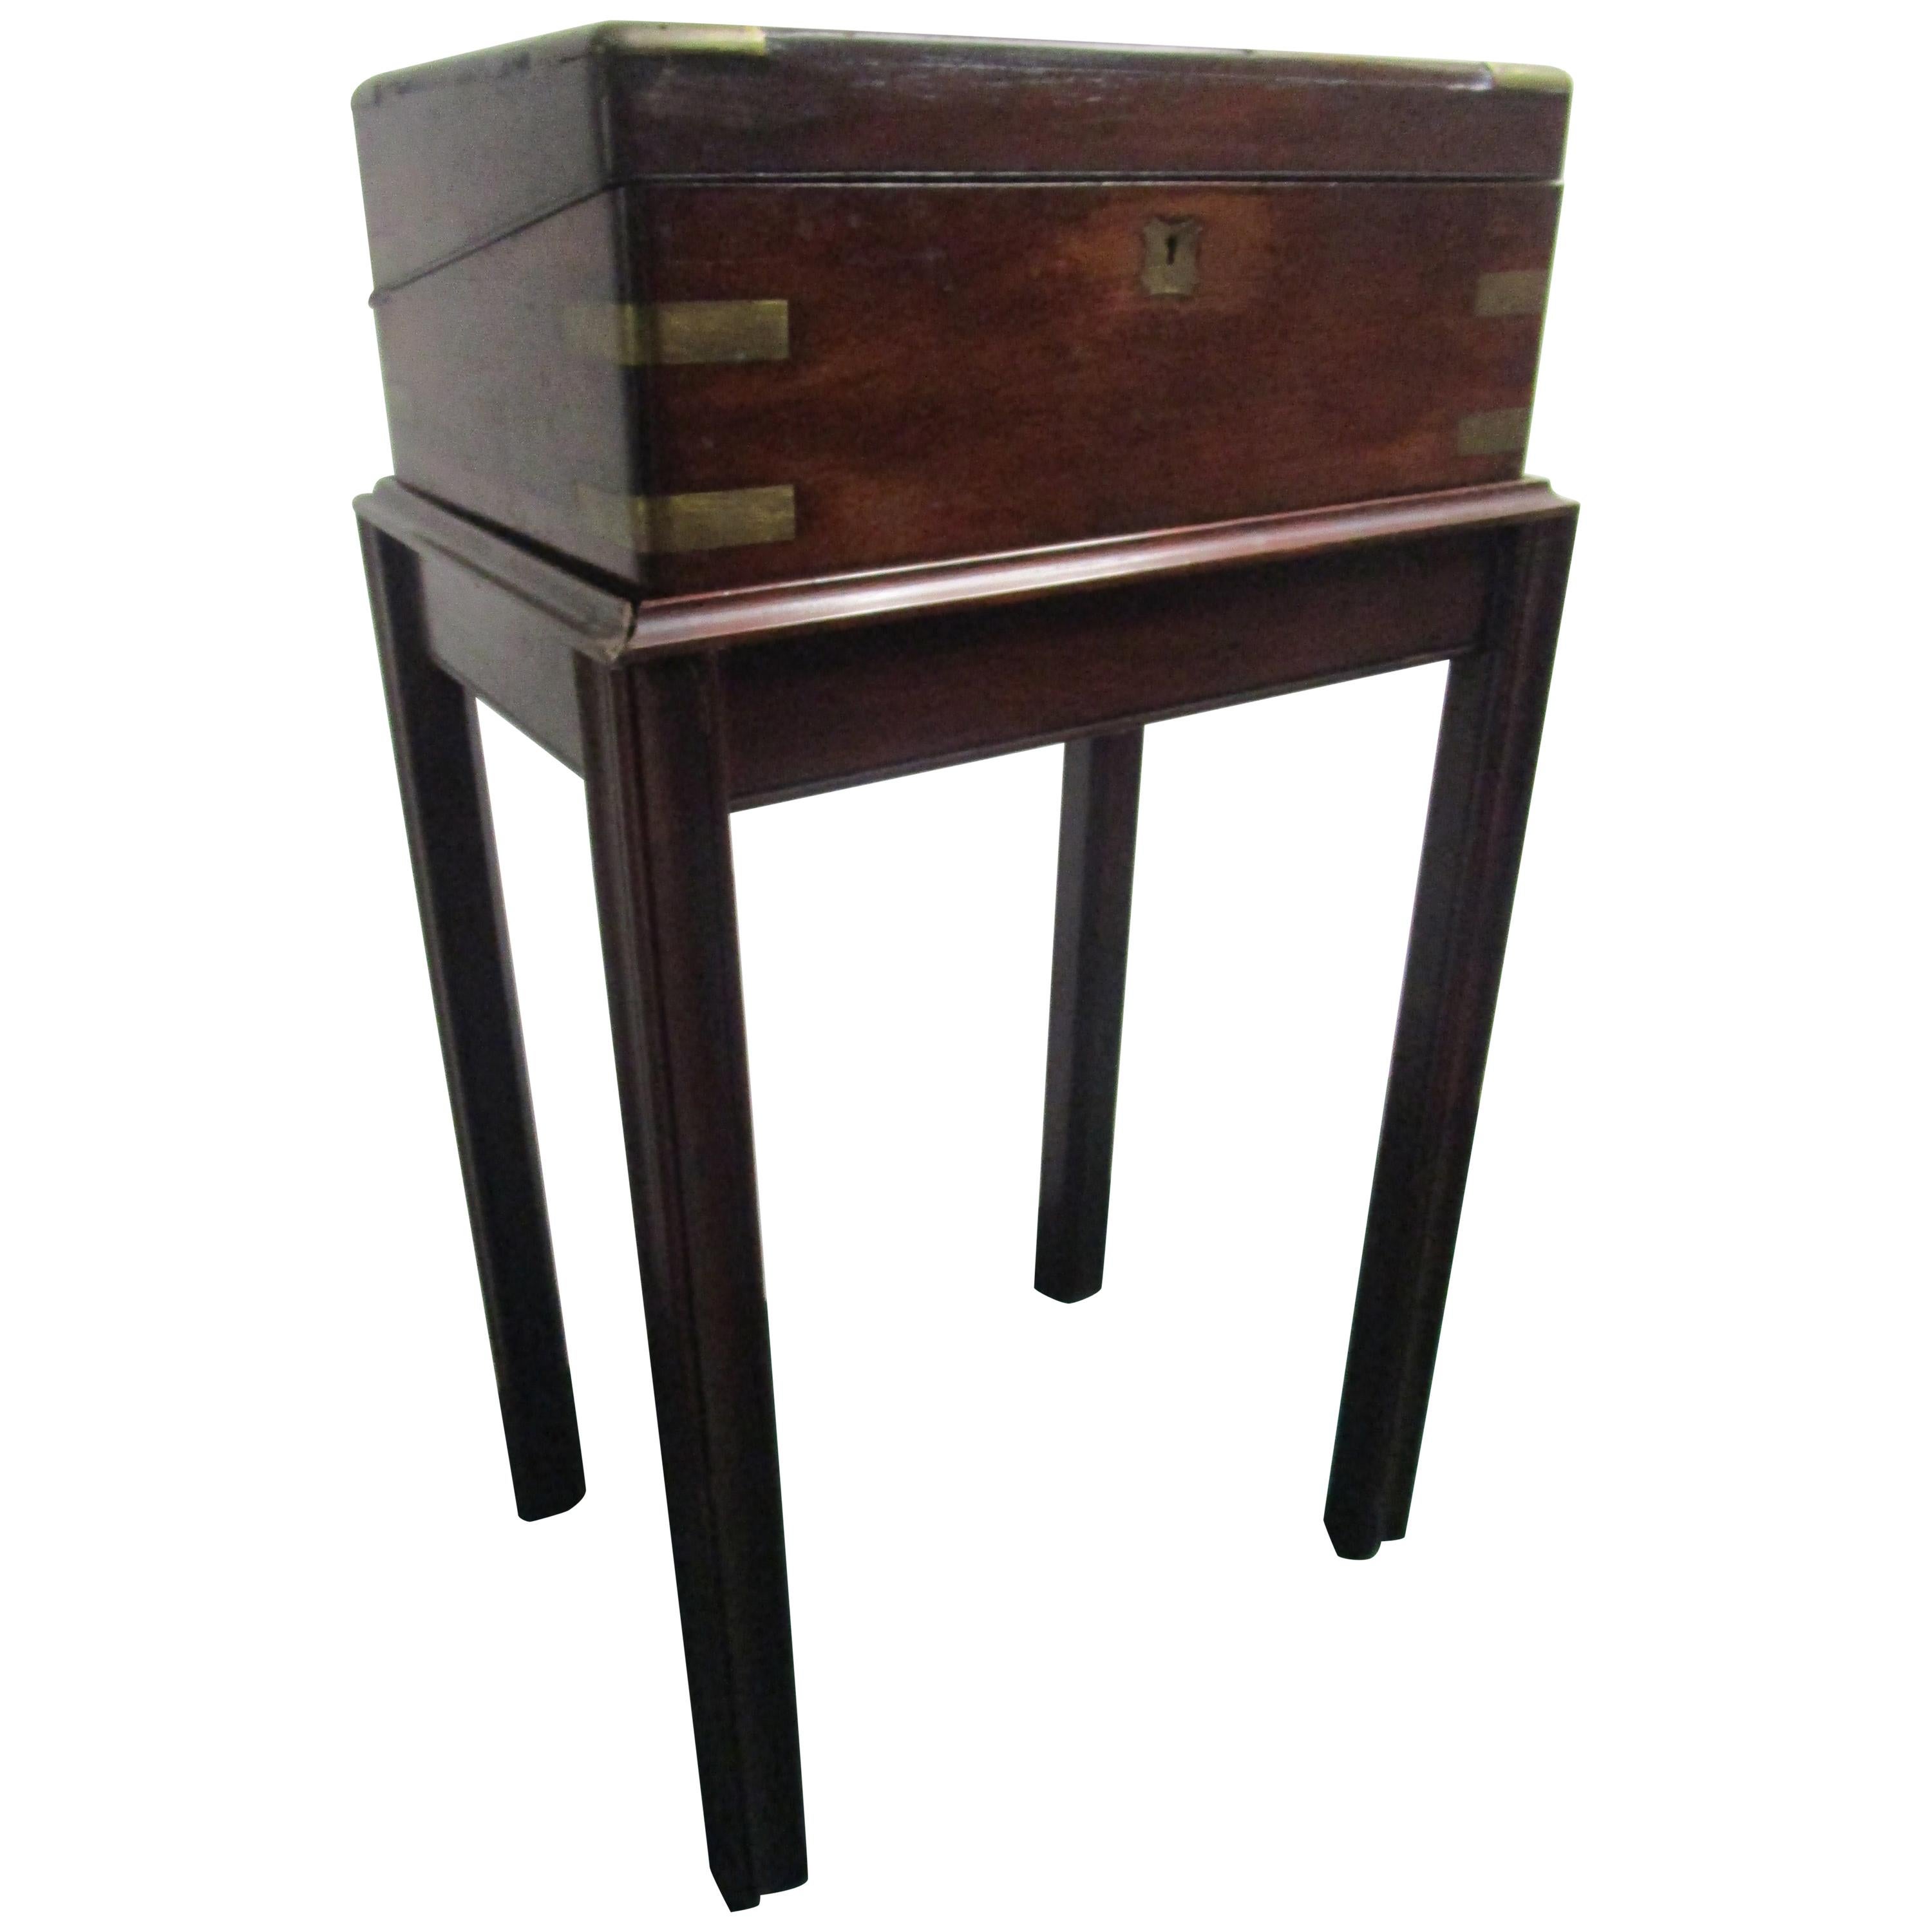 English Regency Mahogany Travelling Lap Desk with Secret Compartment, on Stand